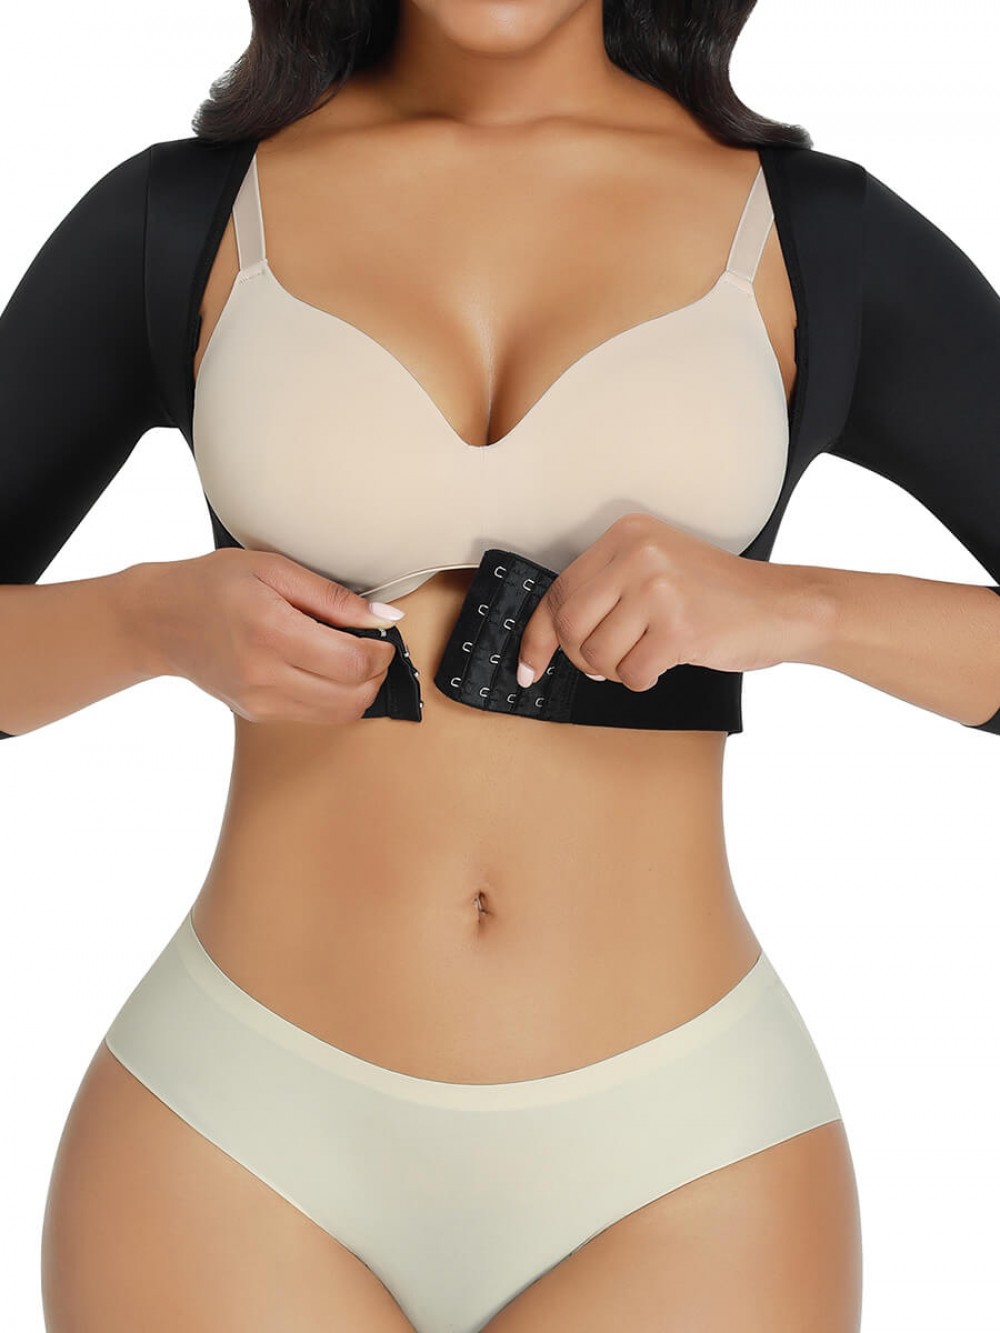 Black Body Corset U-Shaped Breast Support Stretchy Posture Corrector